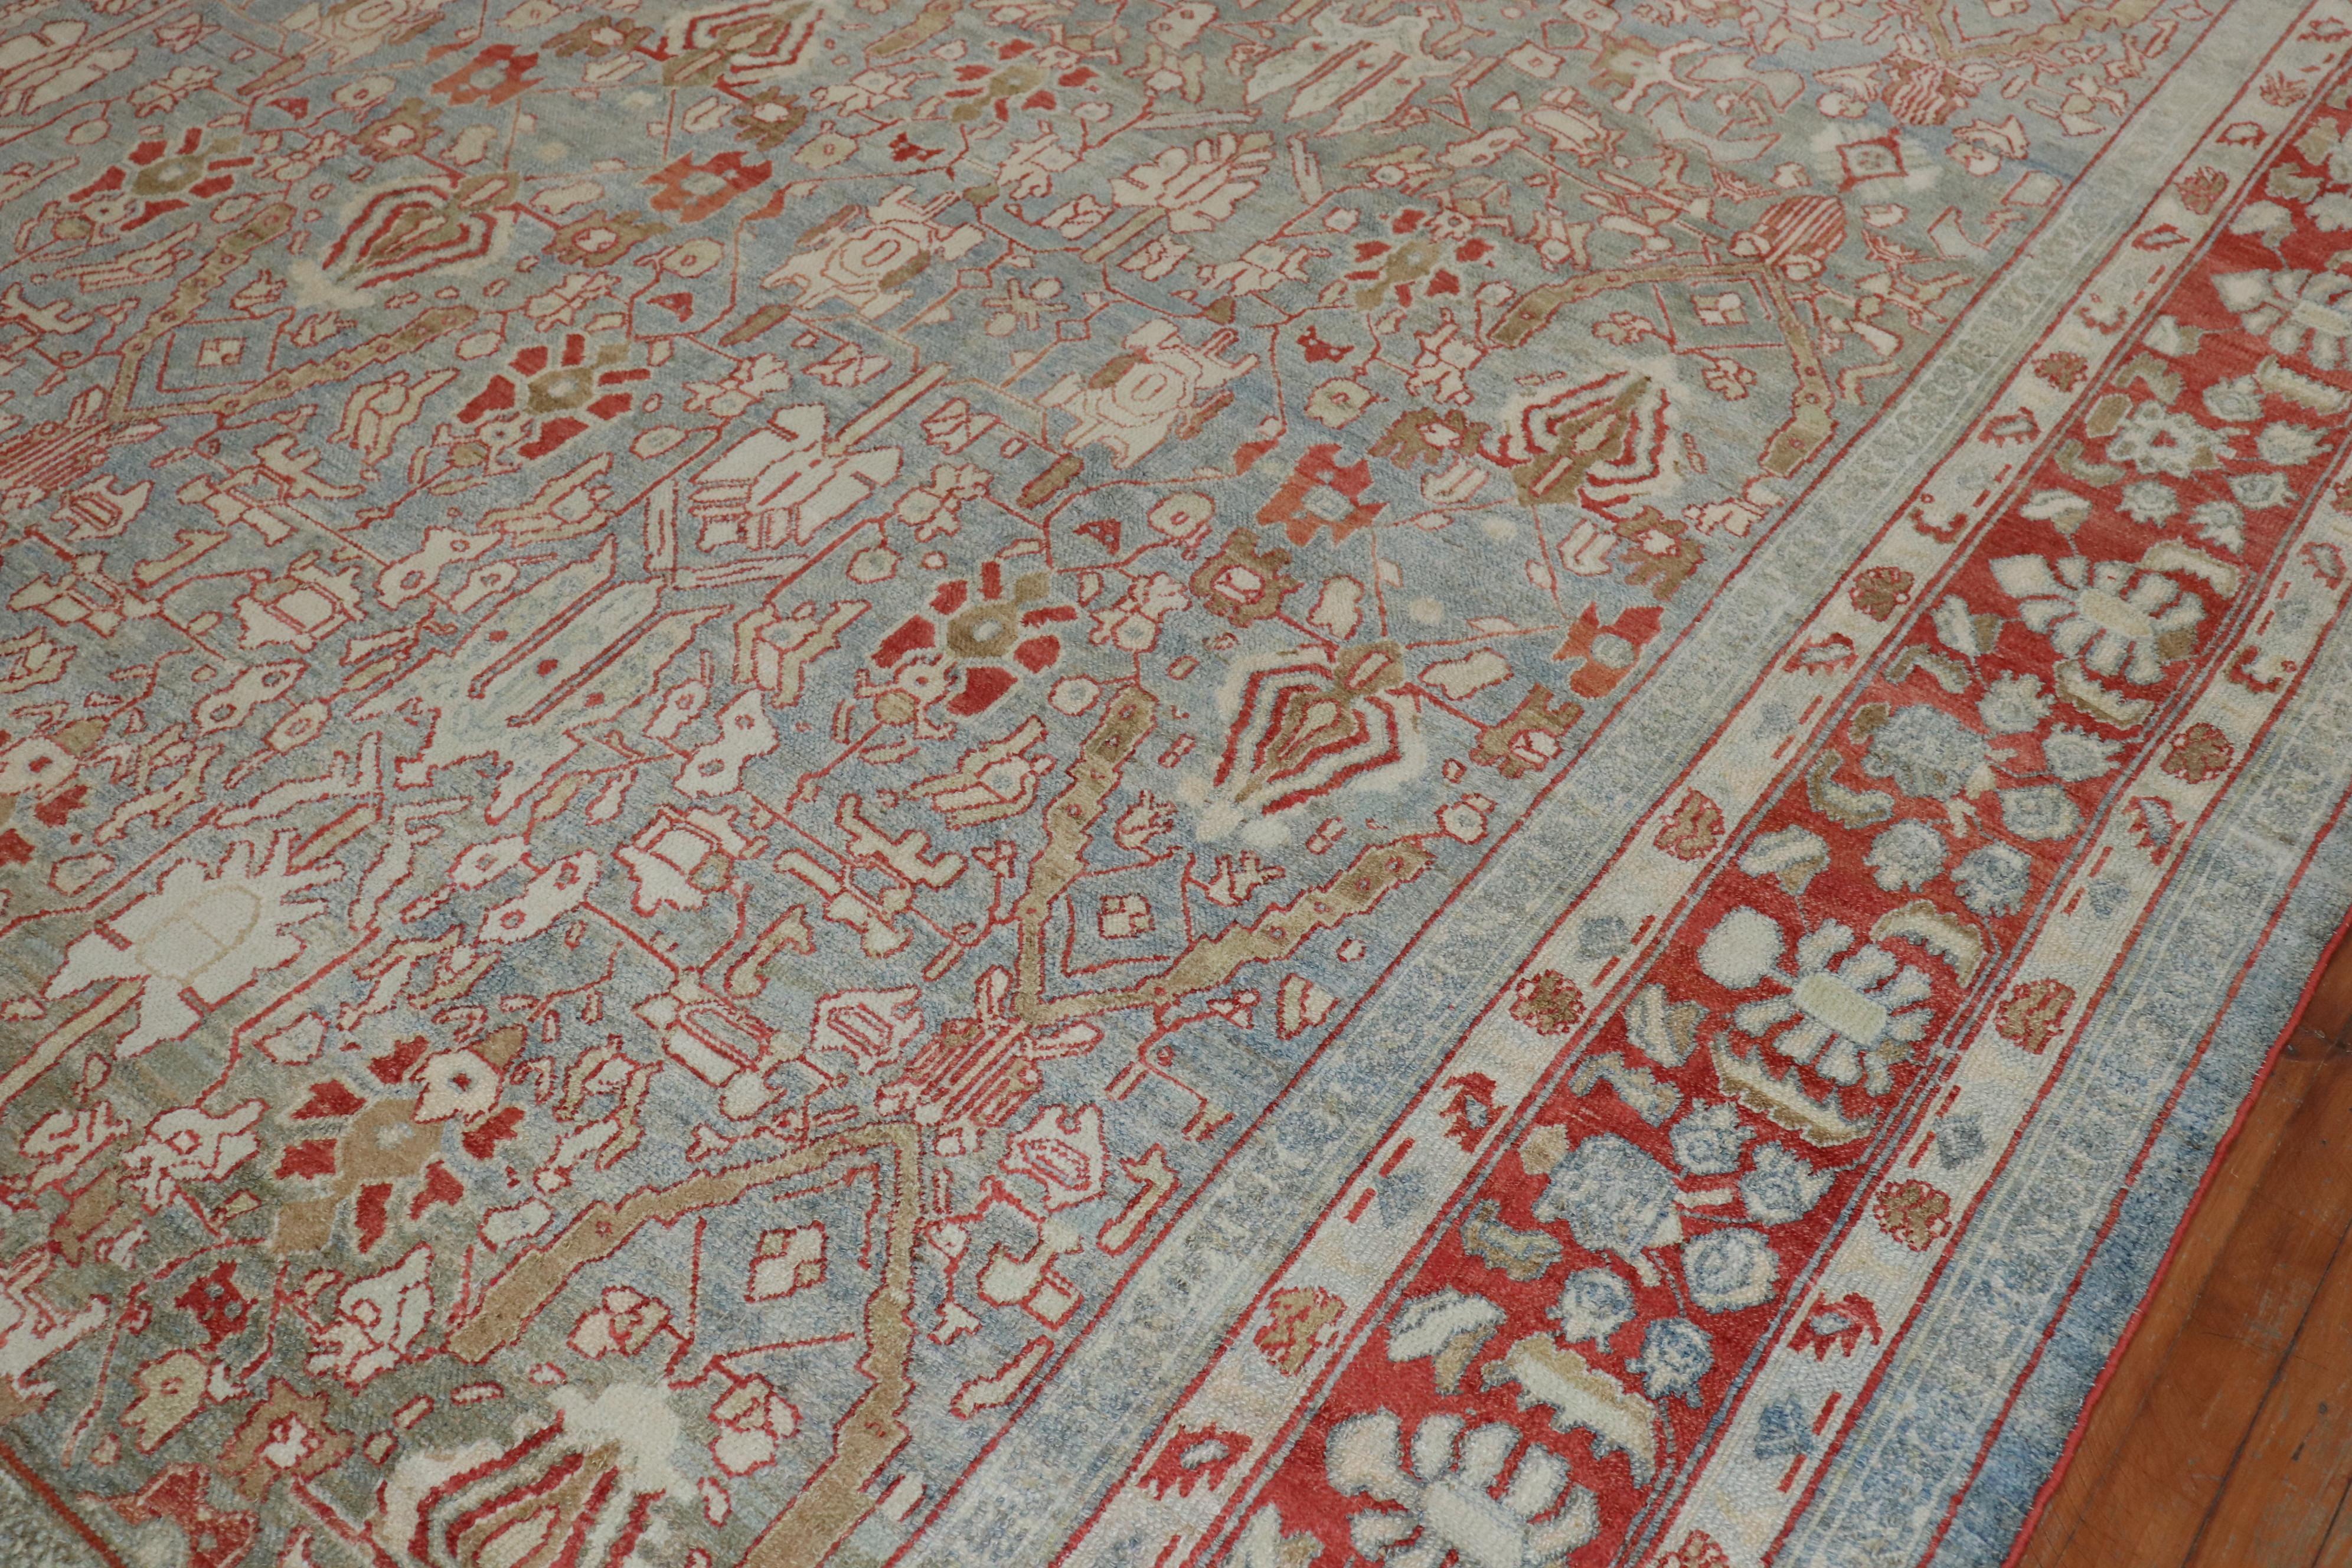 Decorative Oversize Gray Blue Persian Bibikabad Rug, Early 20th Century For Sale 4